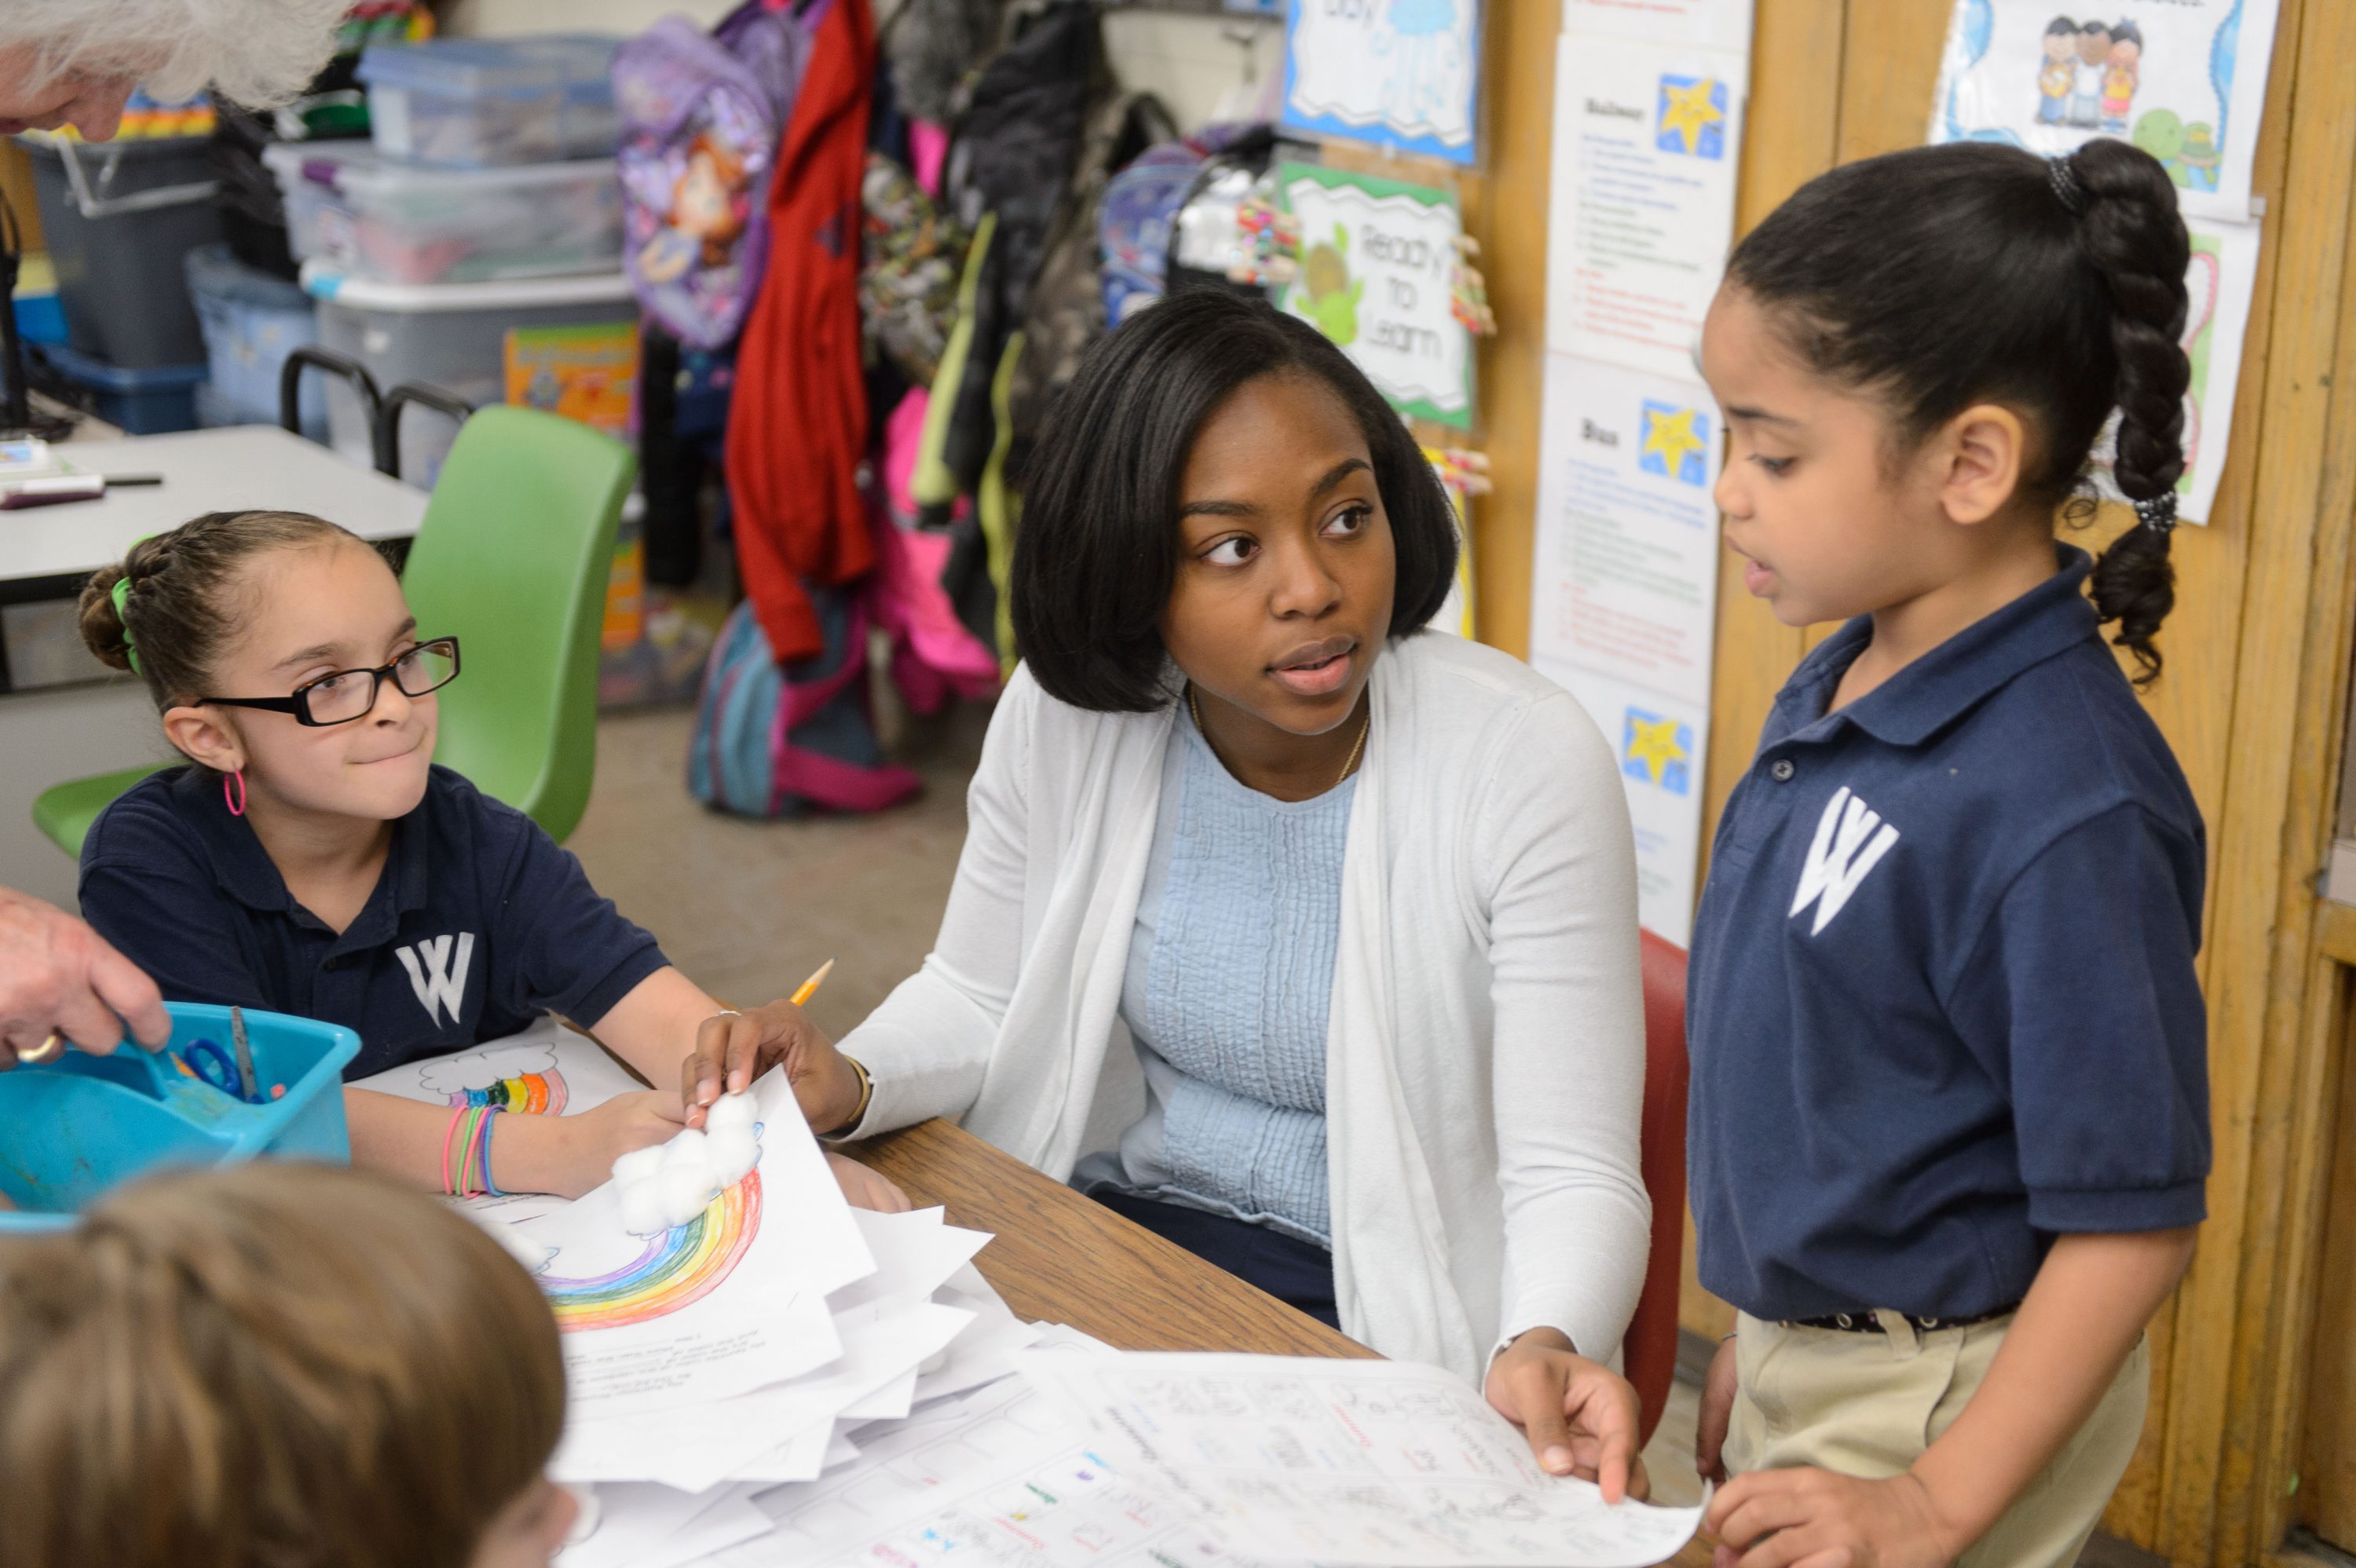 Symone James '16 (ED), a student teacher at W.B. Sweeney School in WIllimantic helps students with reading on April 26, 2016. (Peter Morenus/UConn Photo)